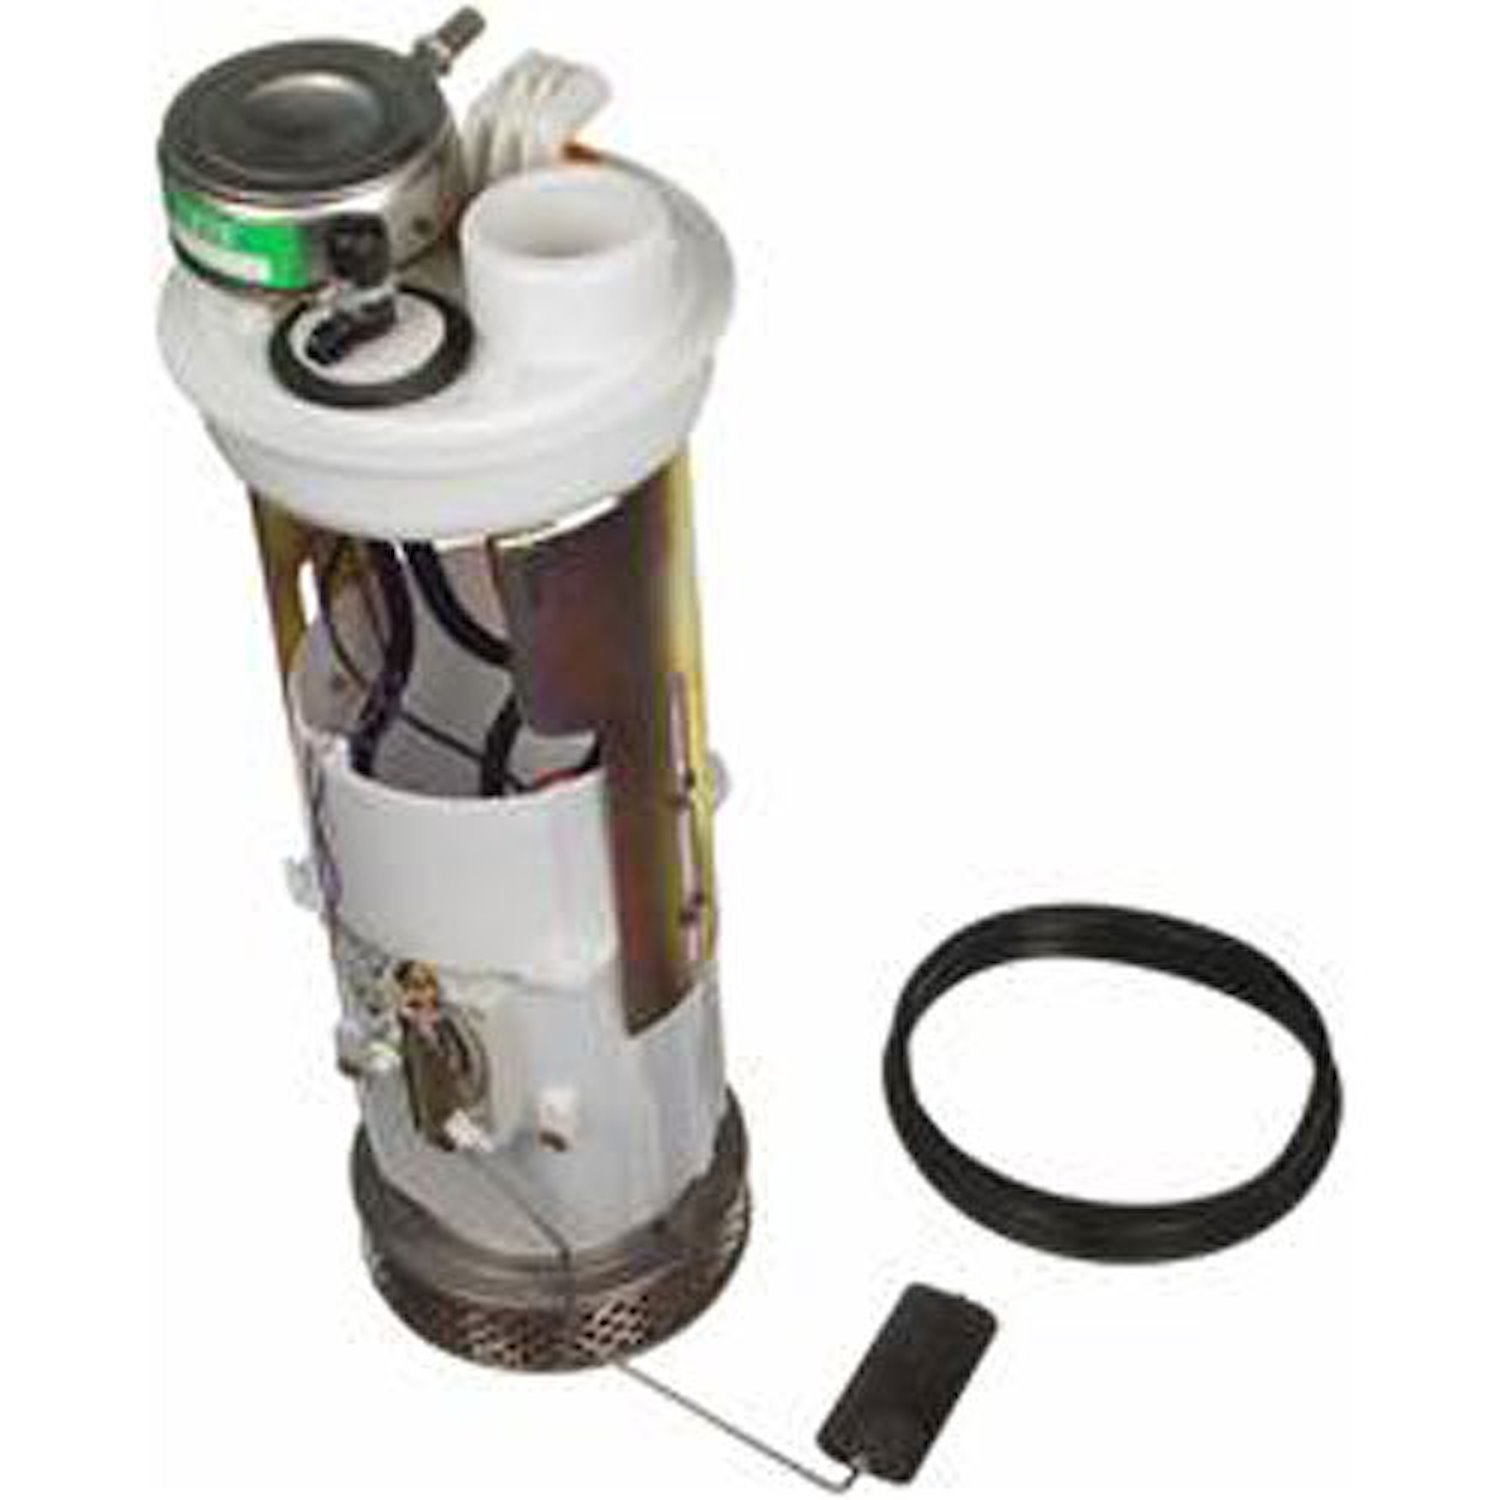 OE Chrysler/Dodge Replacement Electric Fuel Pump Module Assembly